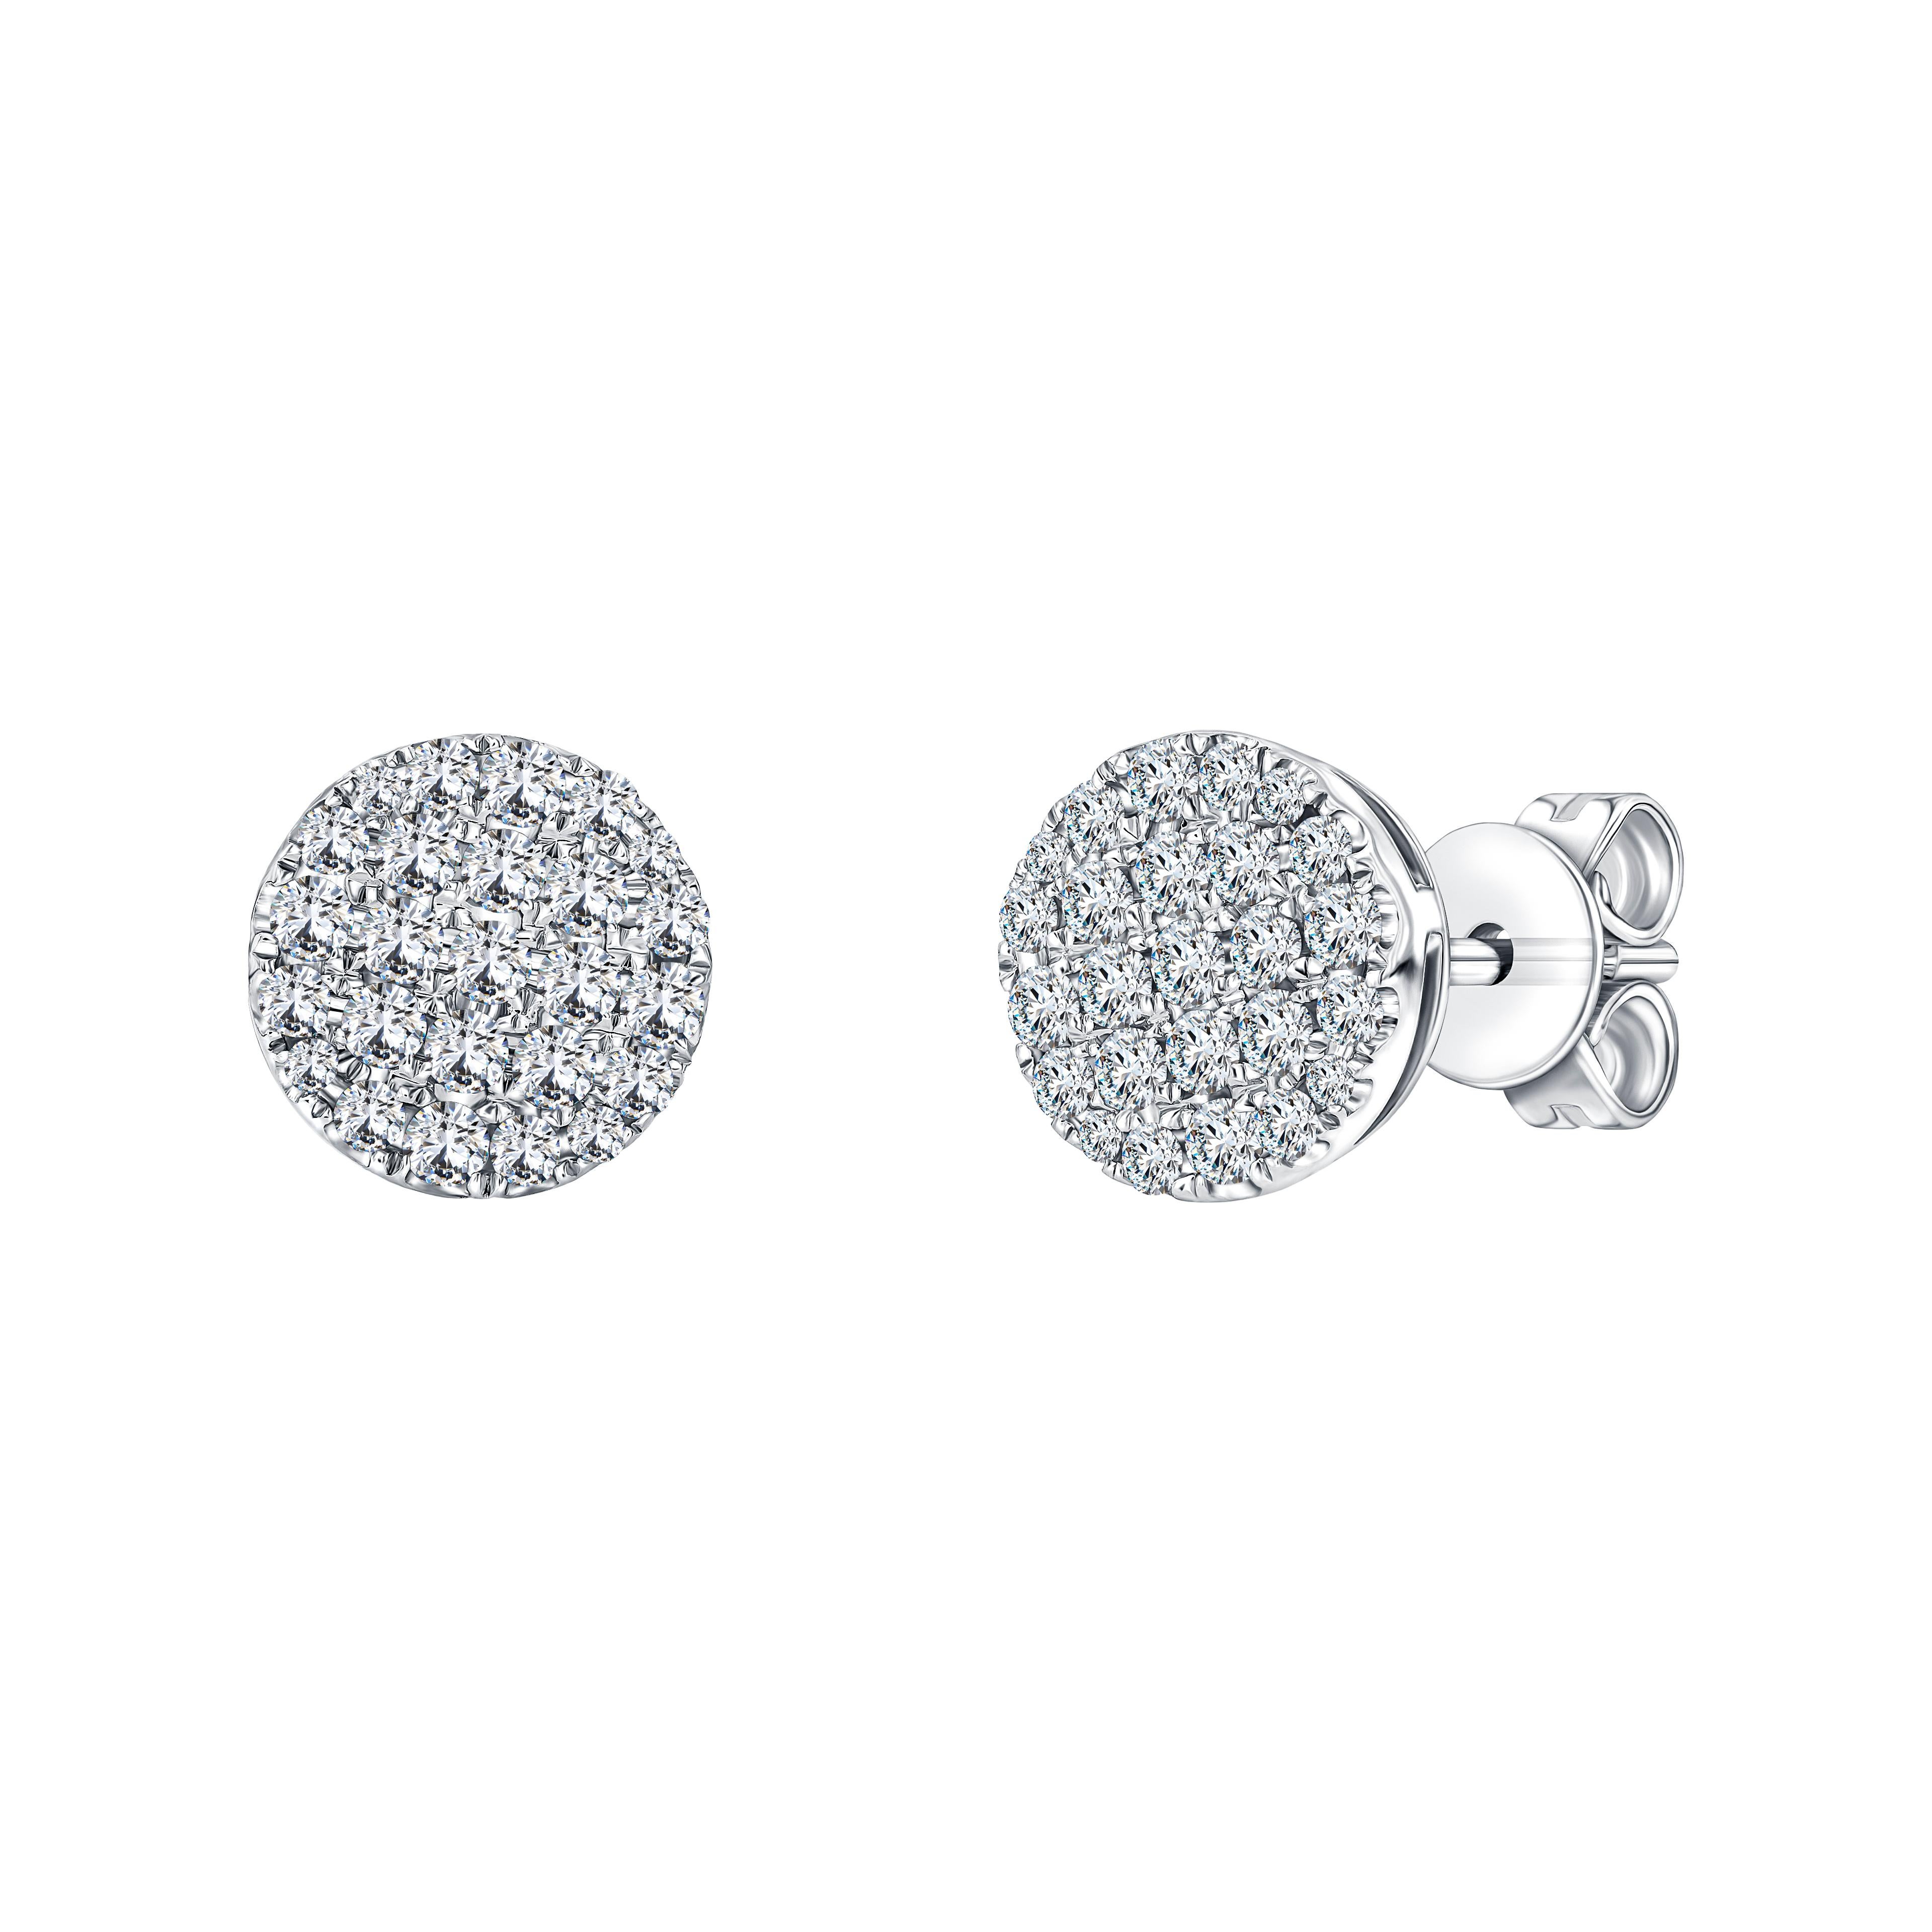 These Exquisite 0.66 Carat Round Diamond Cluster Stud Earrings Color White H Clarity SI1. Set in 18 Karat White Gold these stunning versatile Diamond stud earrings will make an unforgettable gift. British Hallmarked. Available in 18 Karat Yellow and